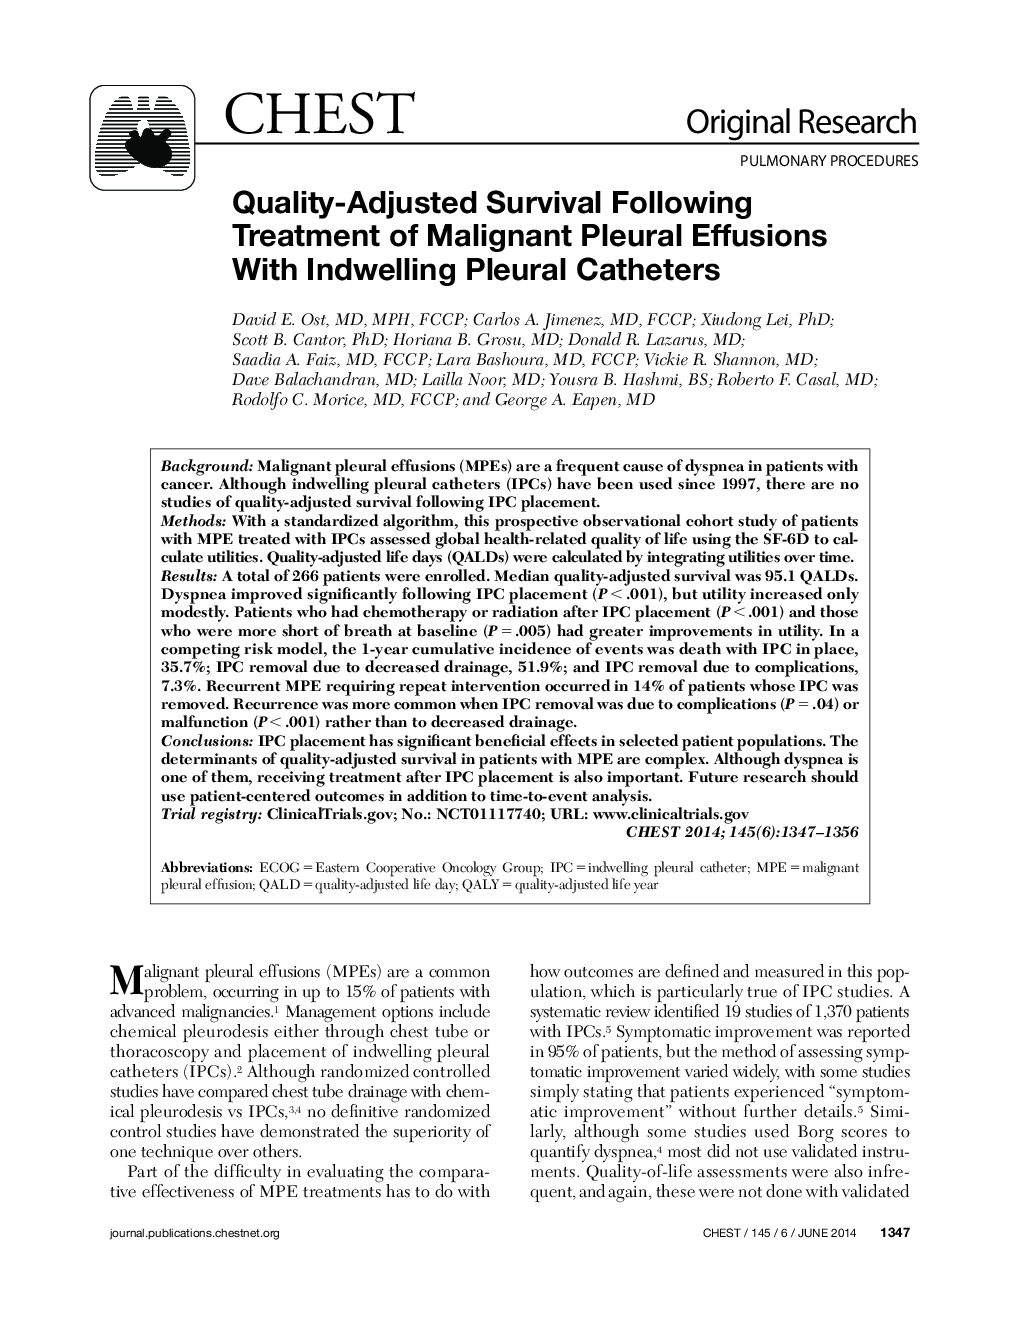 Quality-Adjusted Survival Following Treatment of Malignant Pleural Effusions With Indwelling Pleural Catheters